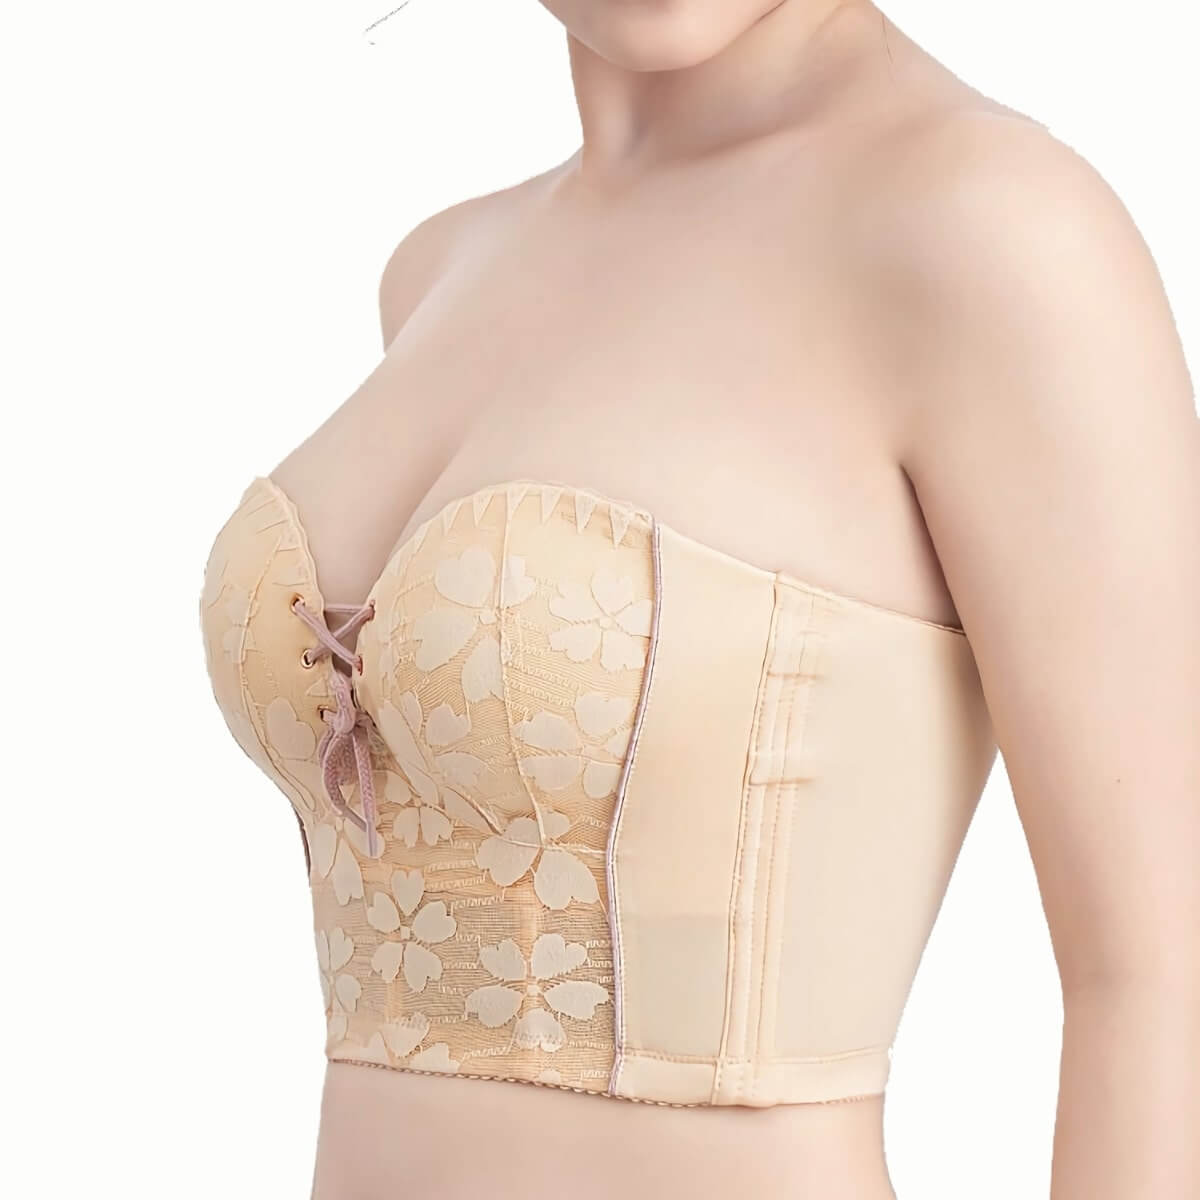 Front Closure Adhesive Strapless Bra A-F Cup – Okay Trendy